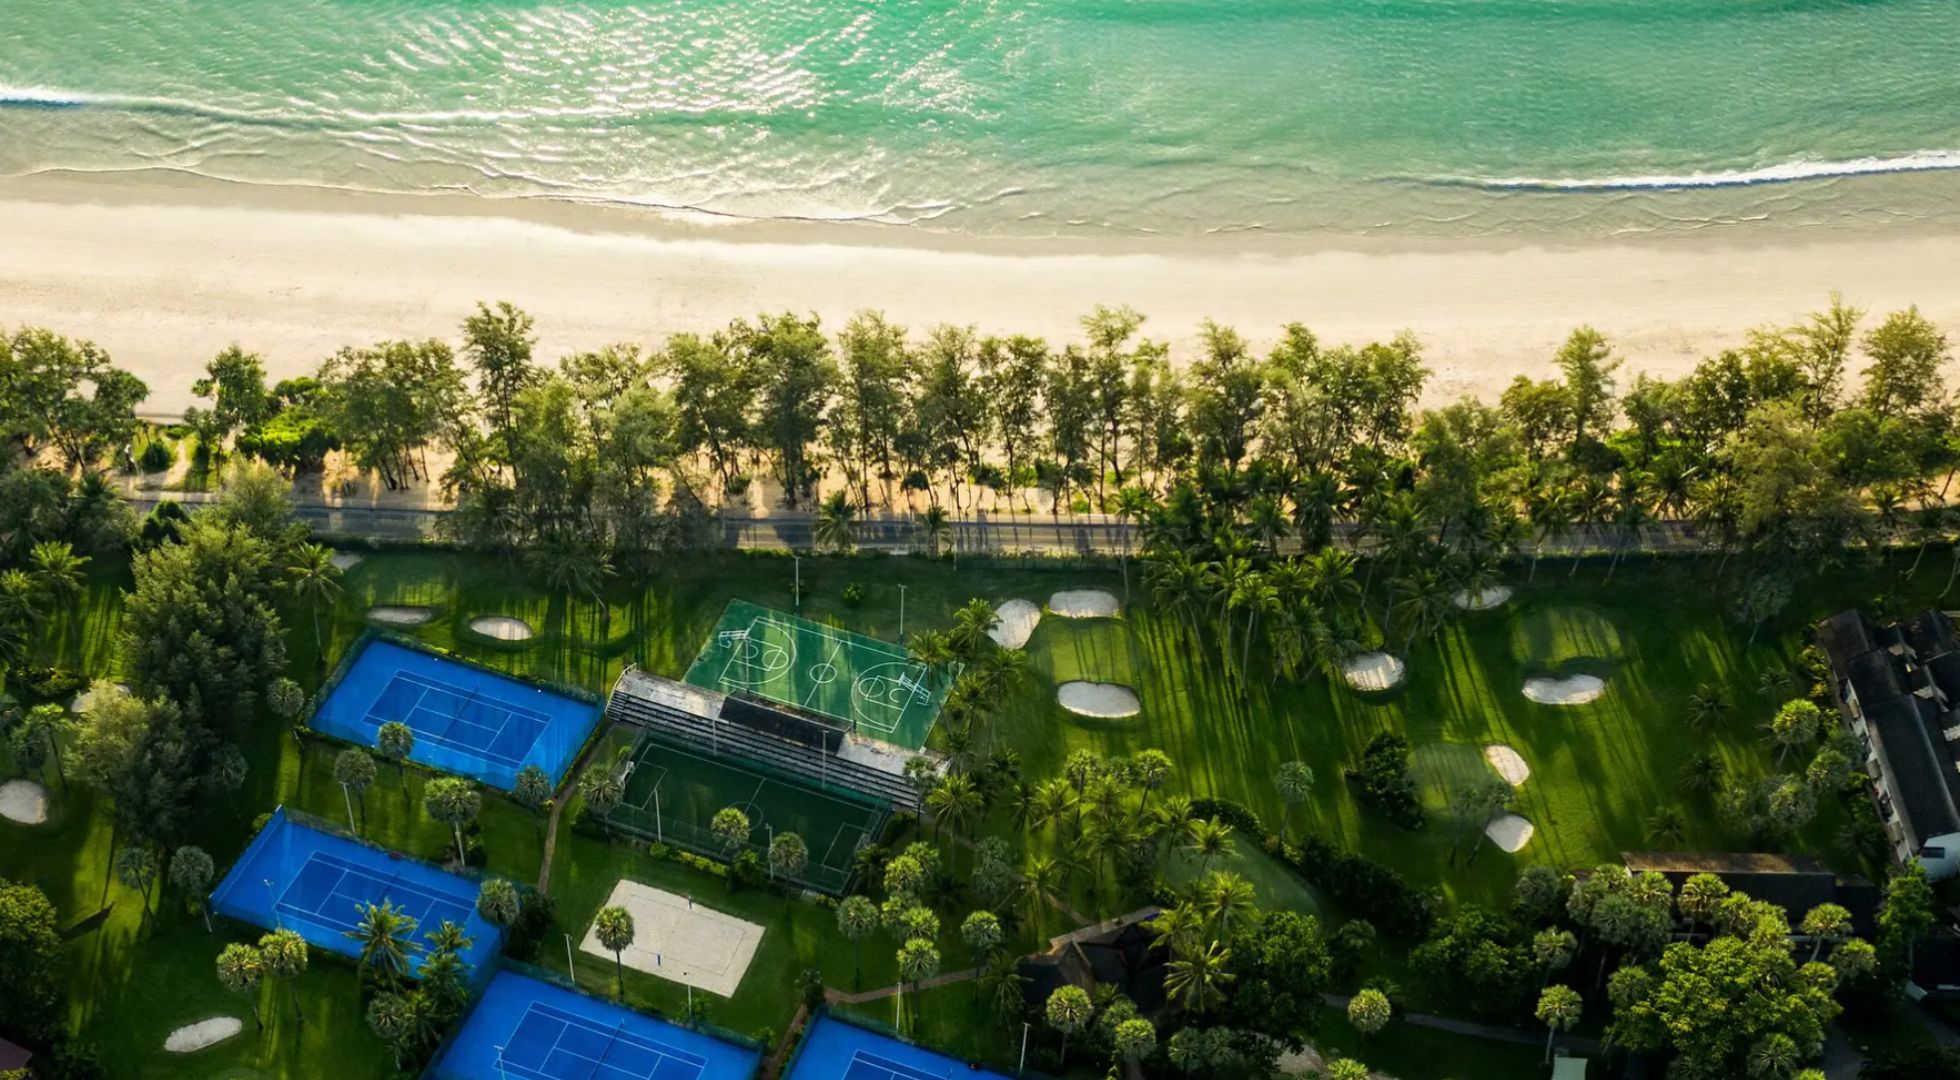 An aerial view of the Club Med Phuket compound featuring tennis courts and a basketball court.